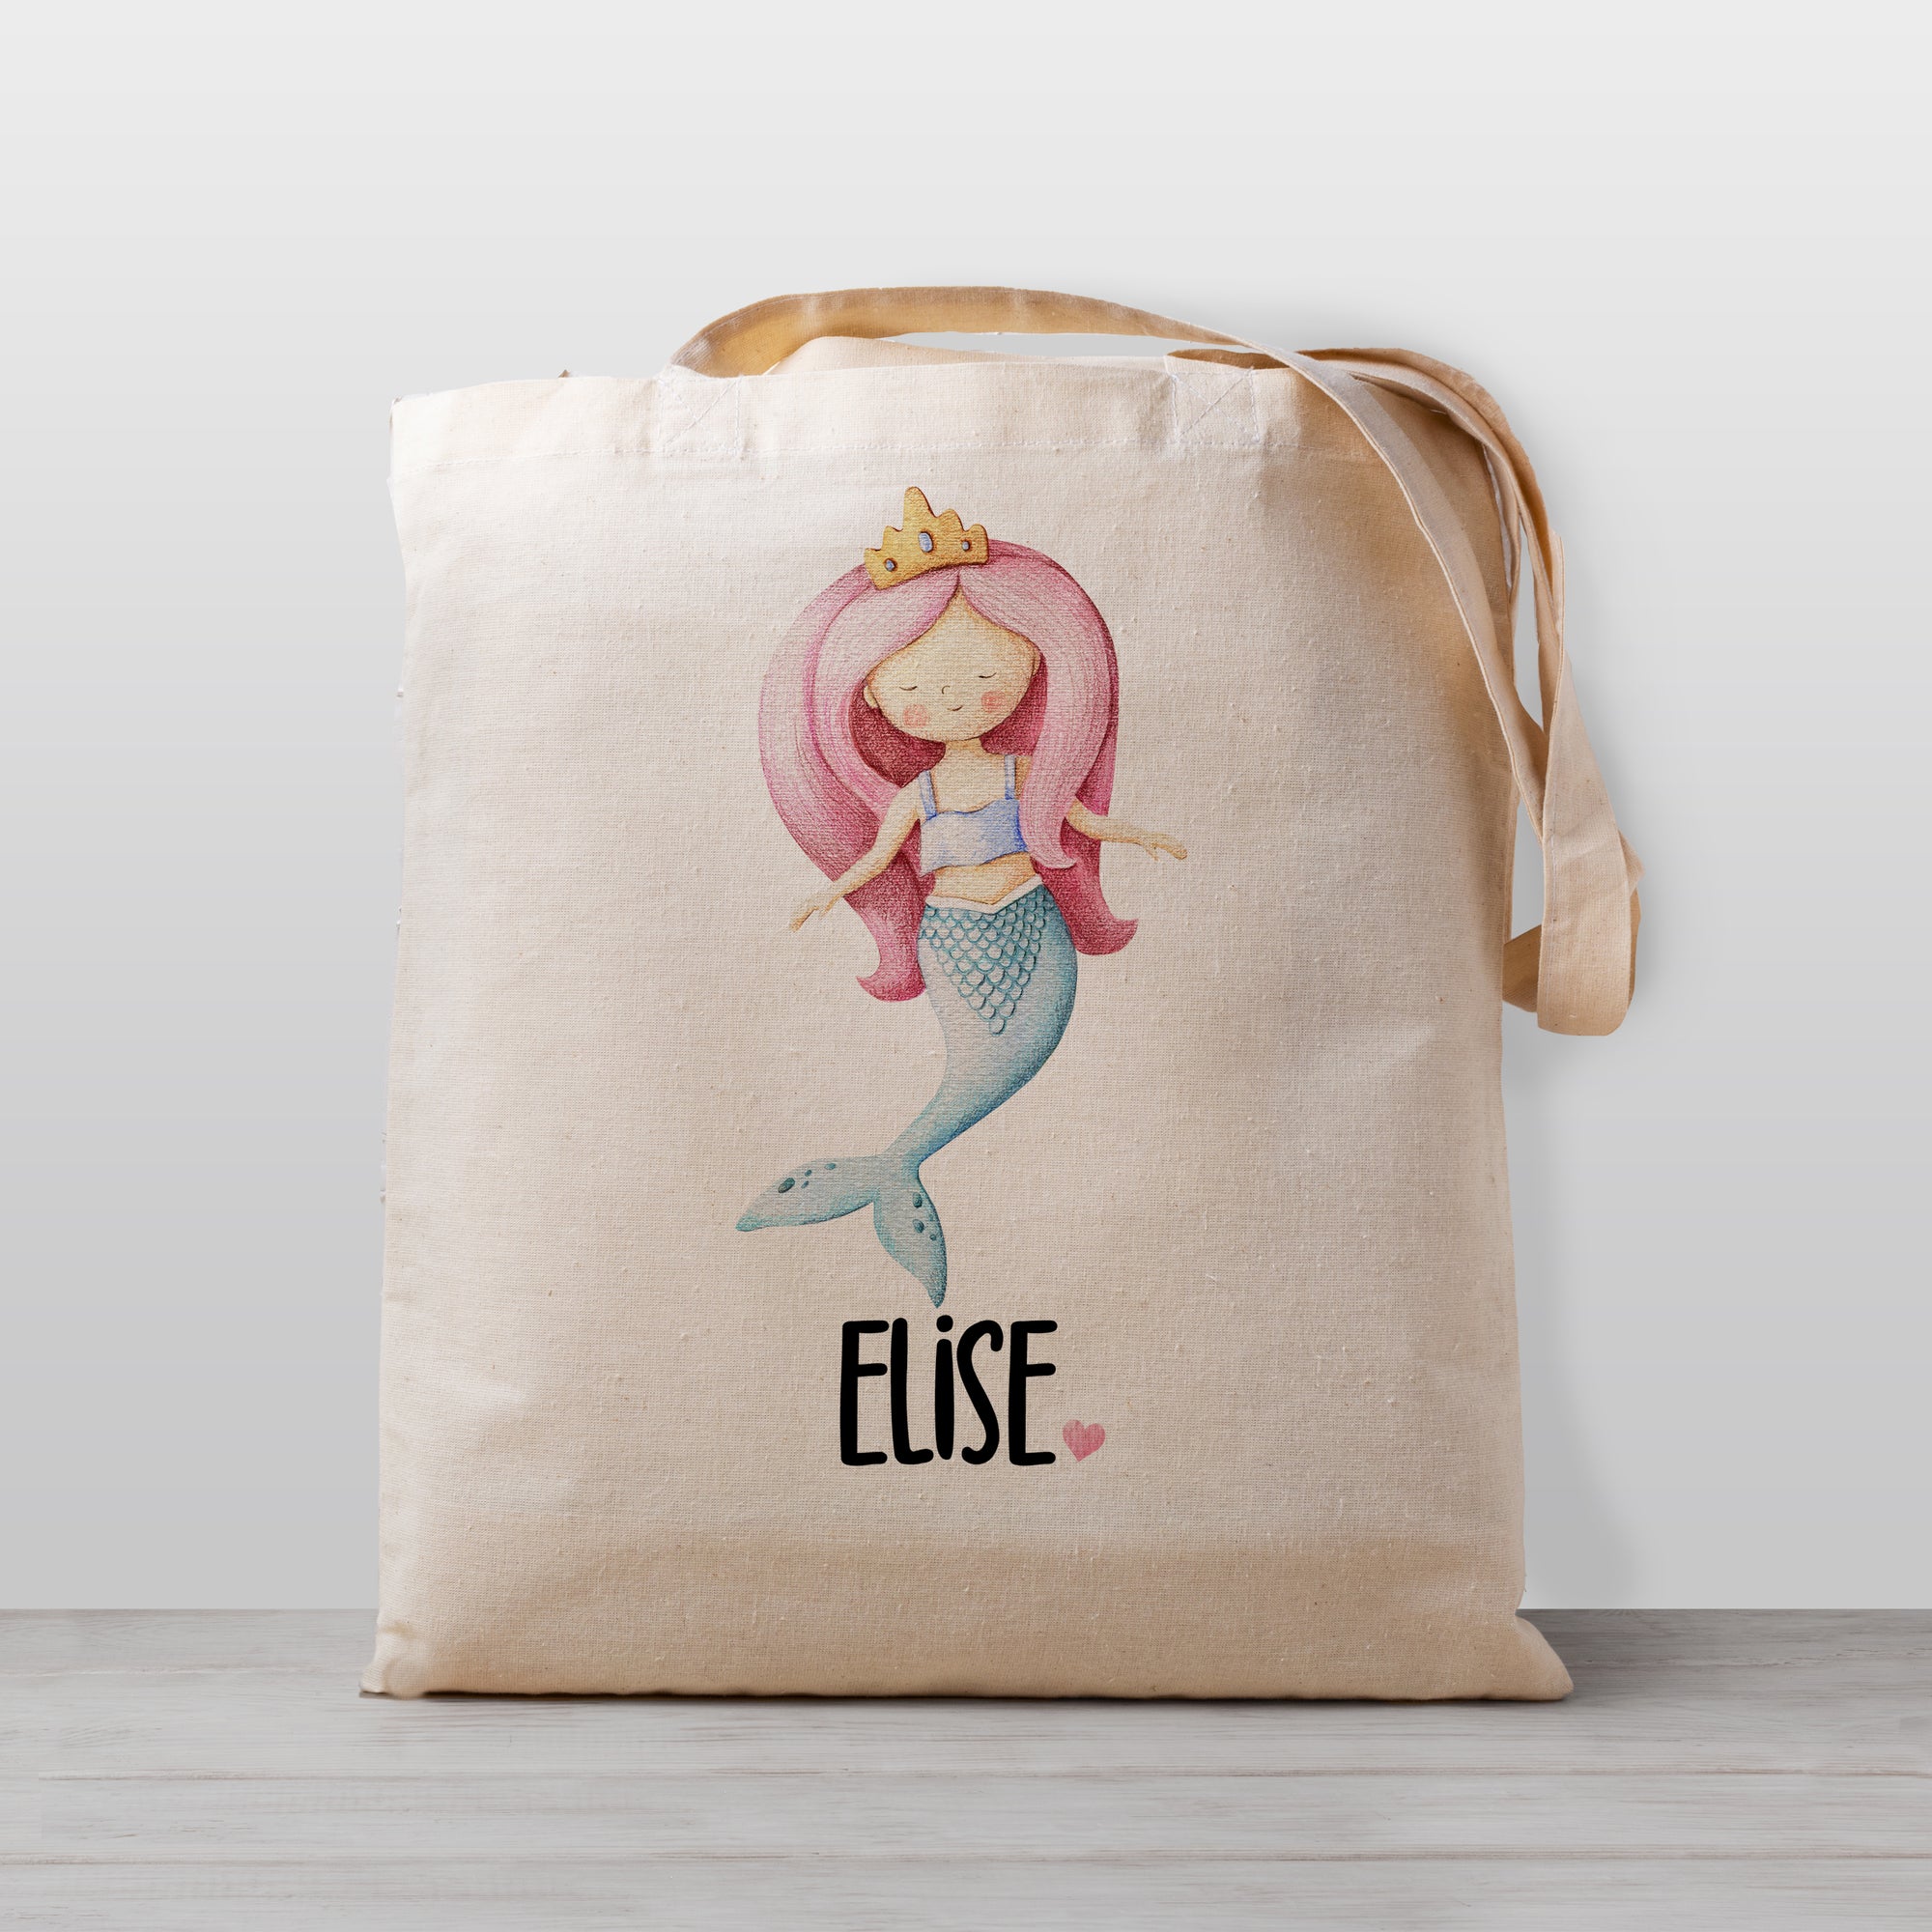 Mermaid Personalized Tote Bag for girls, mermaid has pink hair and a crown, 100% natural cotton canvas tote